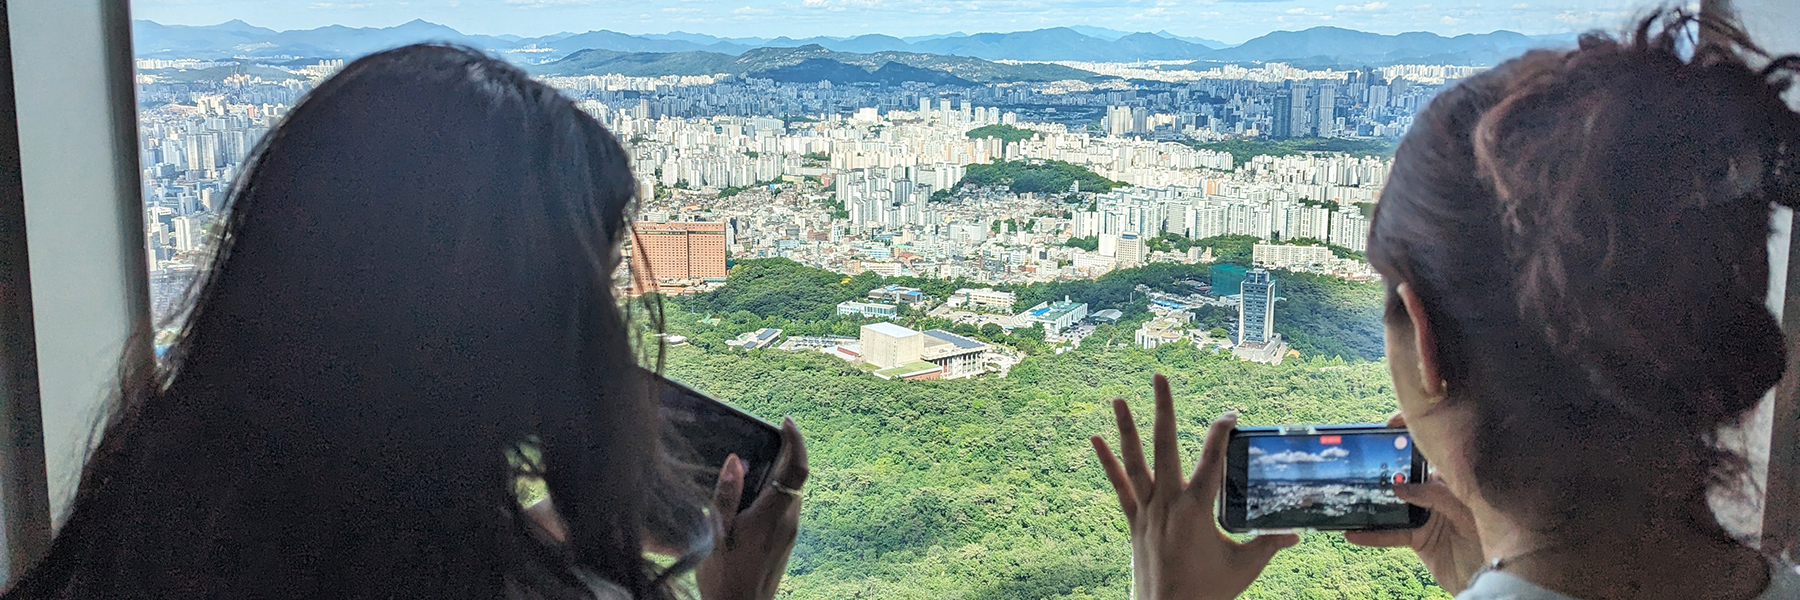 Students-at-the-Namsan-Tower-looking-out-to-Seoul BANNER